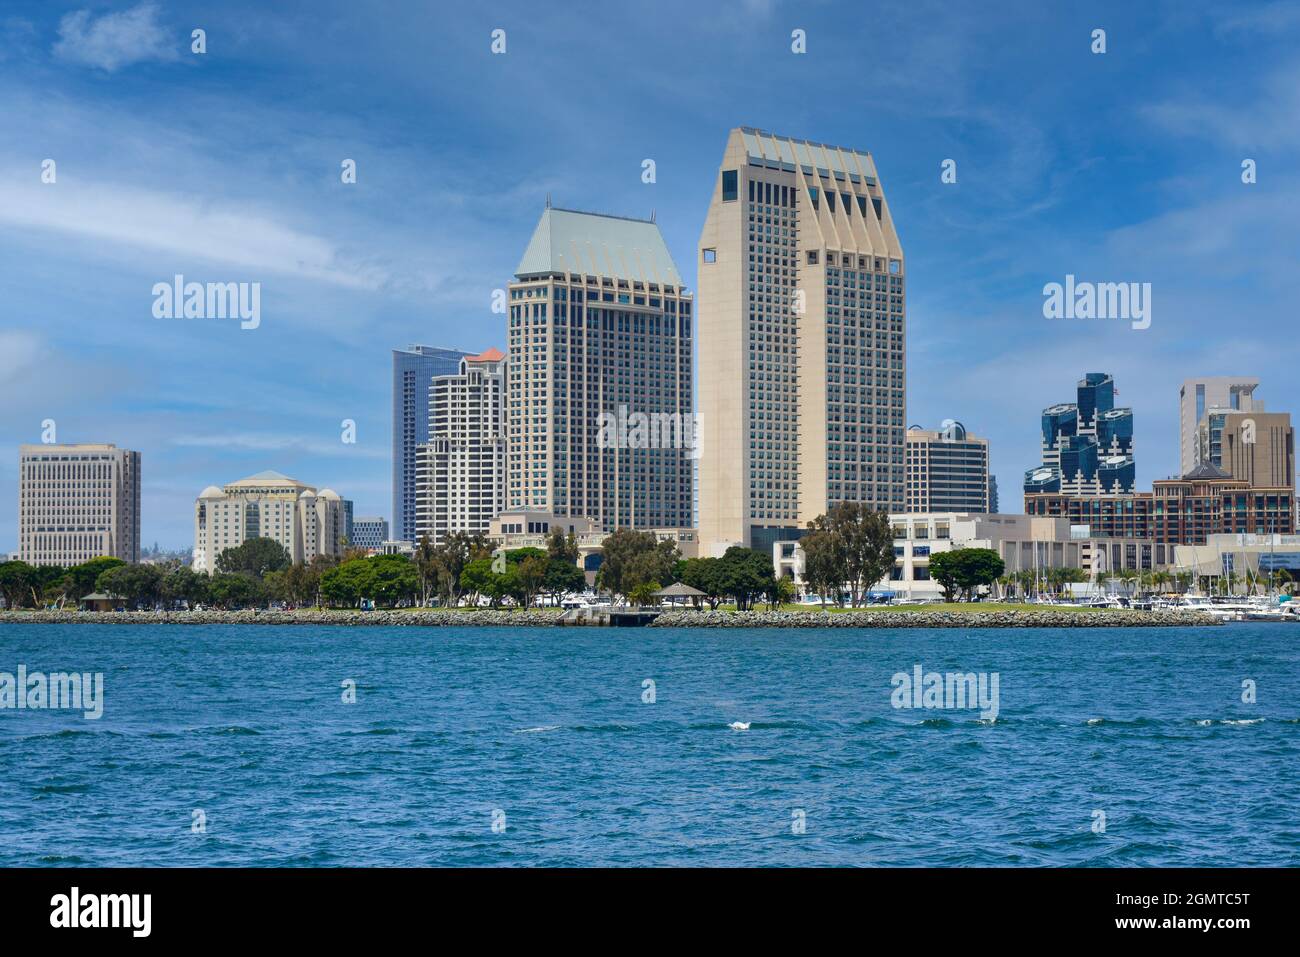 Bay view of stylish Manchester Grand Hyatt San Diego Hotel looming over the Embarcadero Marina Park South on the waterfront by the bay in San Diego,CA Stock Photo